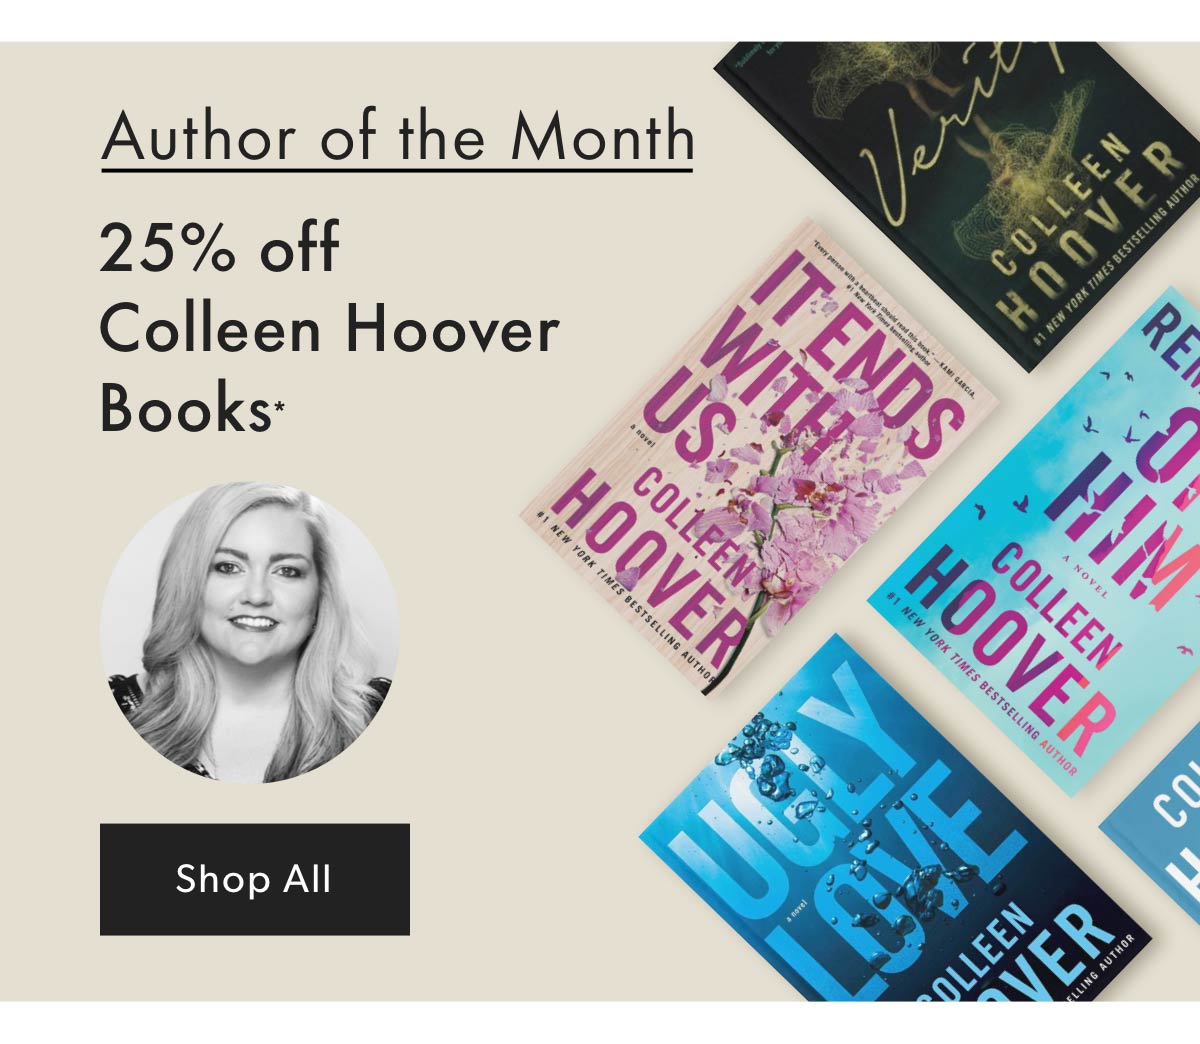 25% off Colleen Hoover Books*